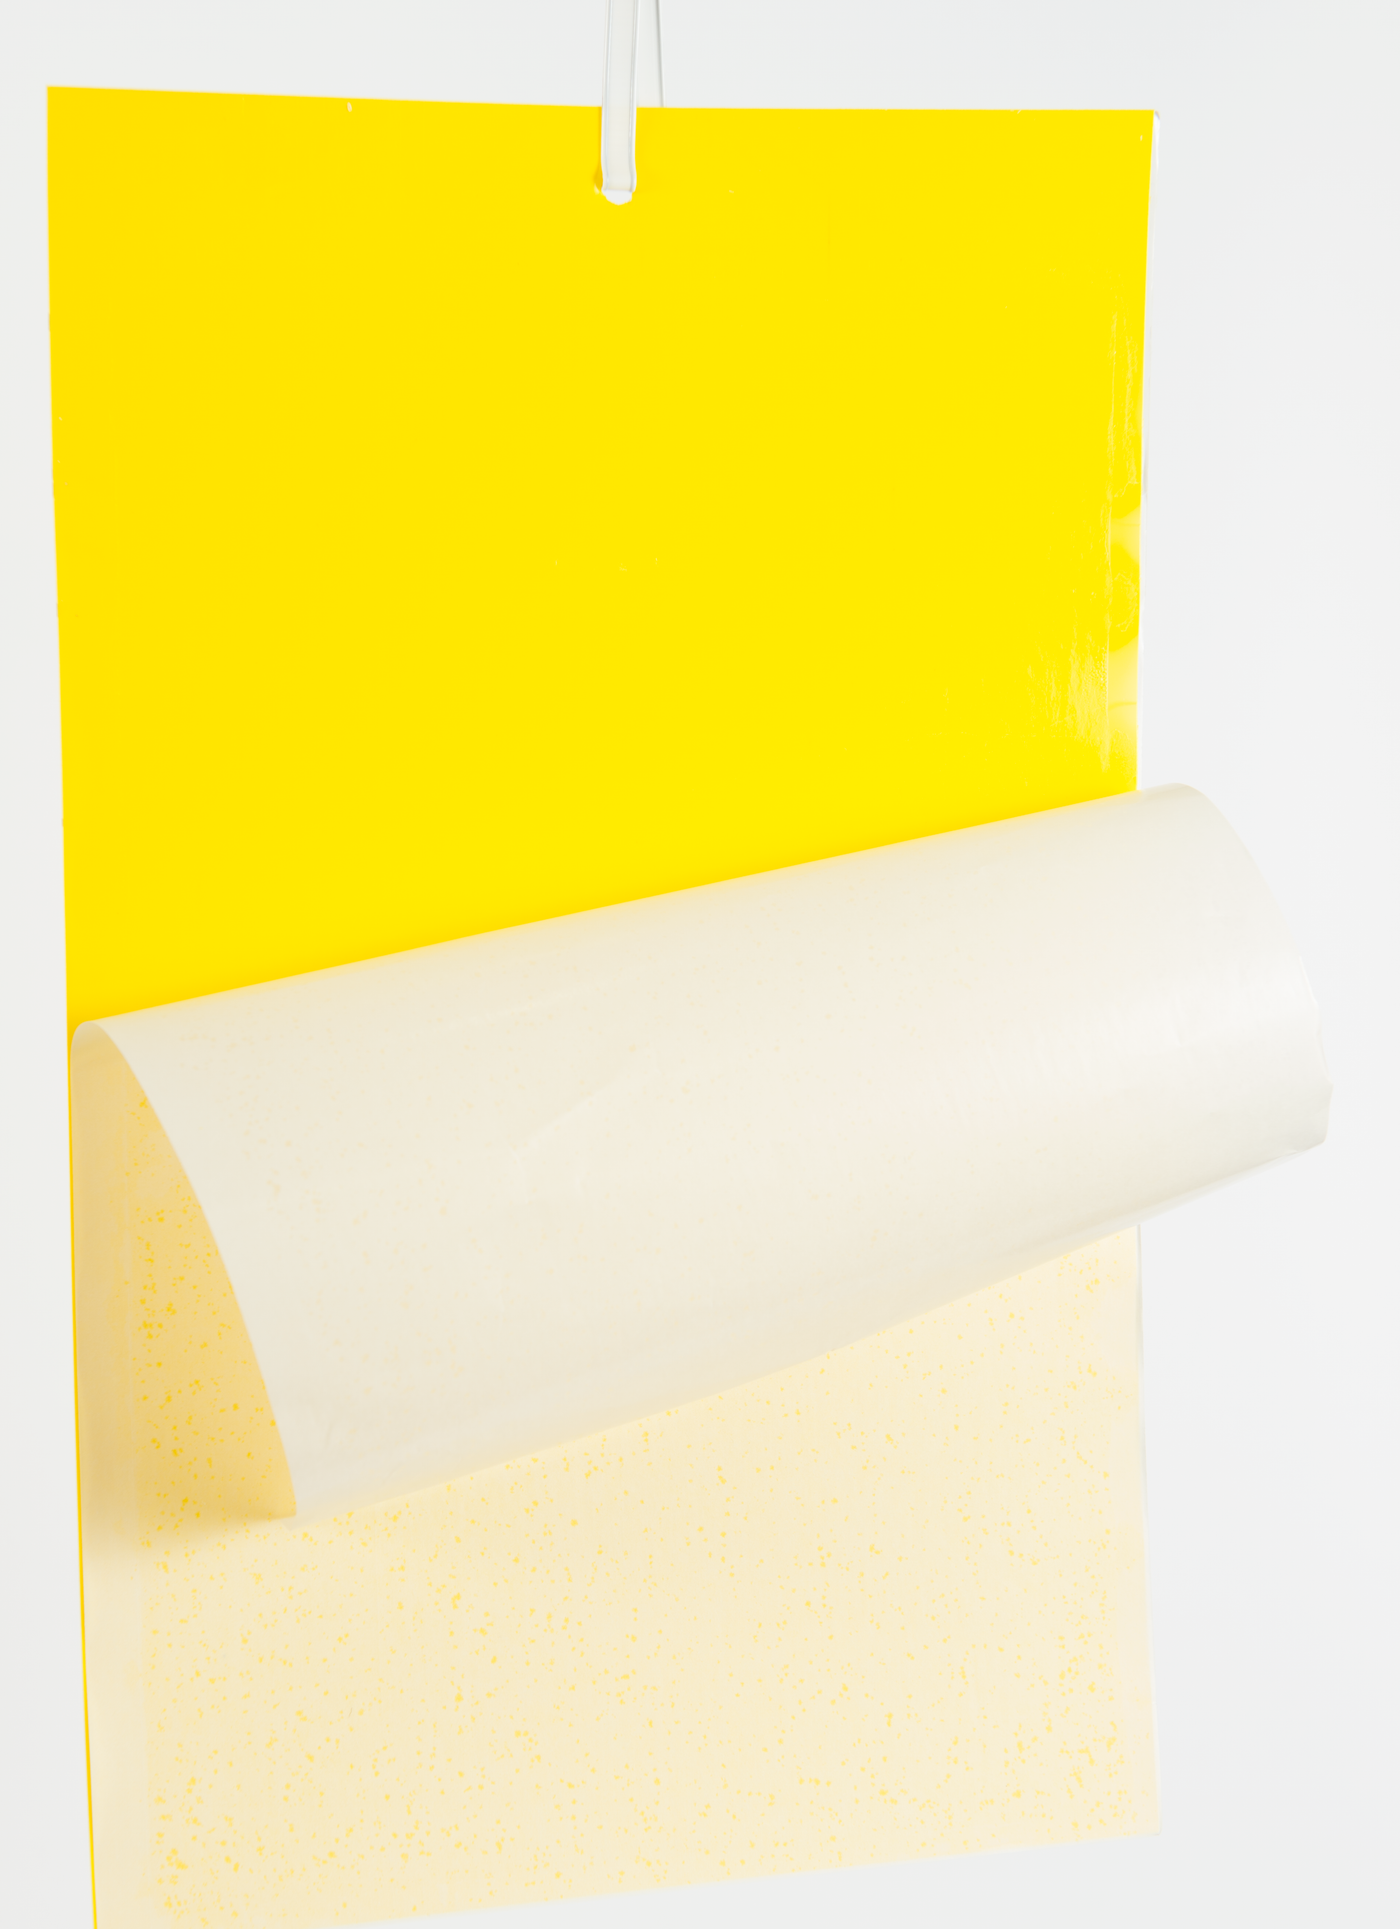 Large 10x16 Sticky Rectangle Card Trap, Yellow, Blue and Black